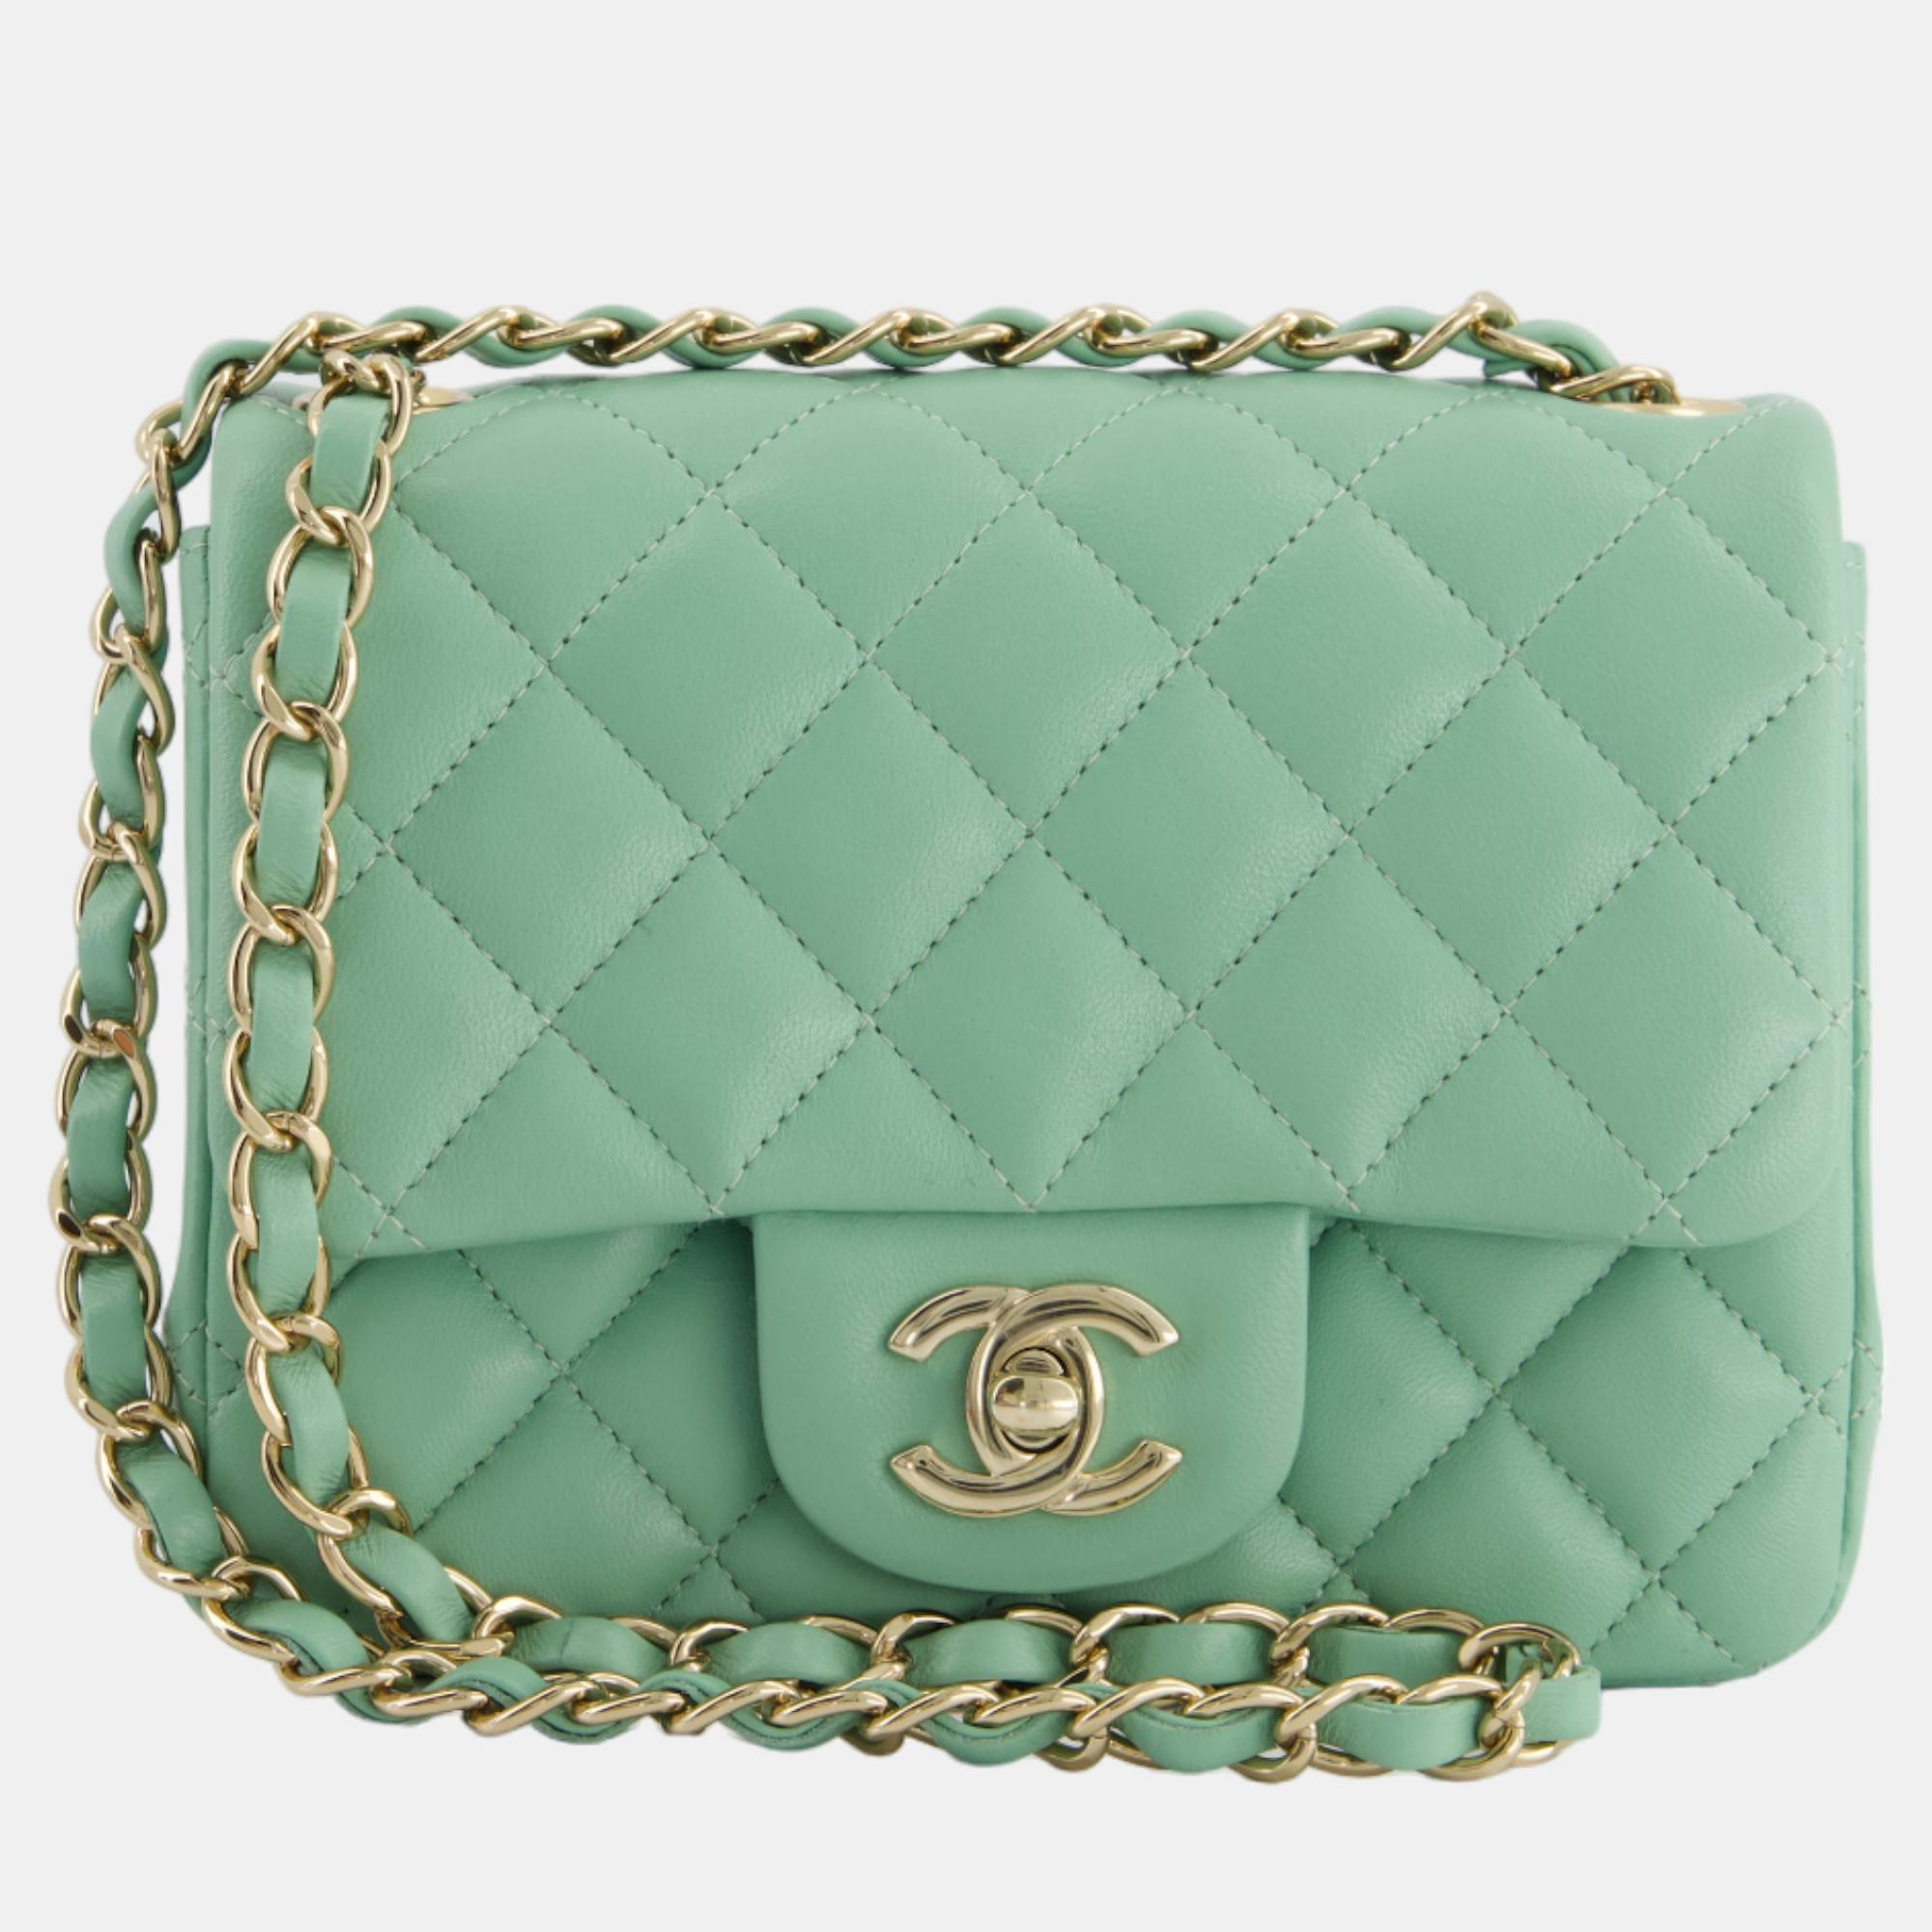 Chanel green tea mini square bag in lambskin leather with champagne gold hardware